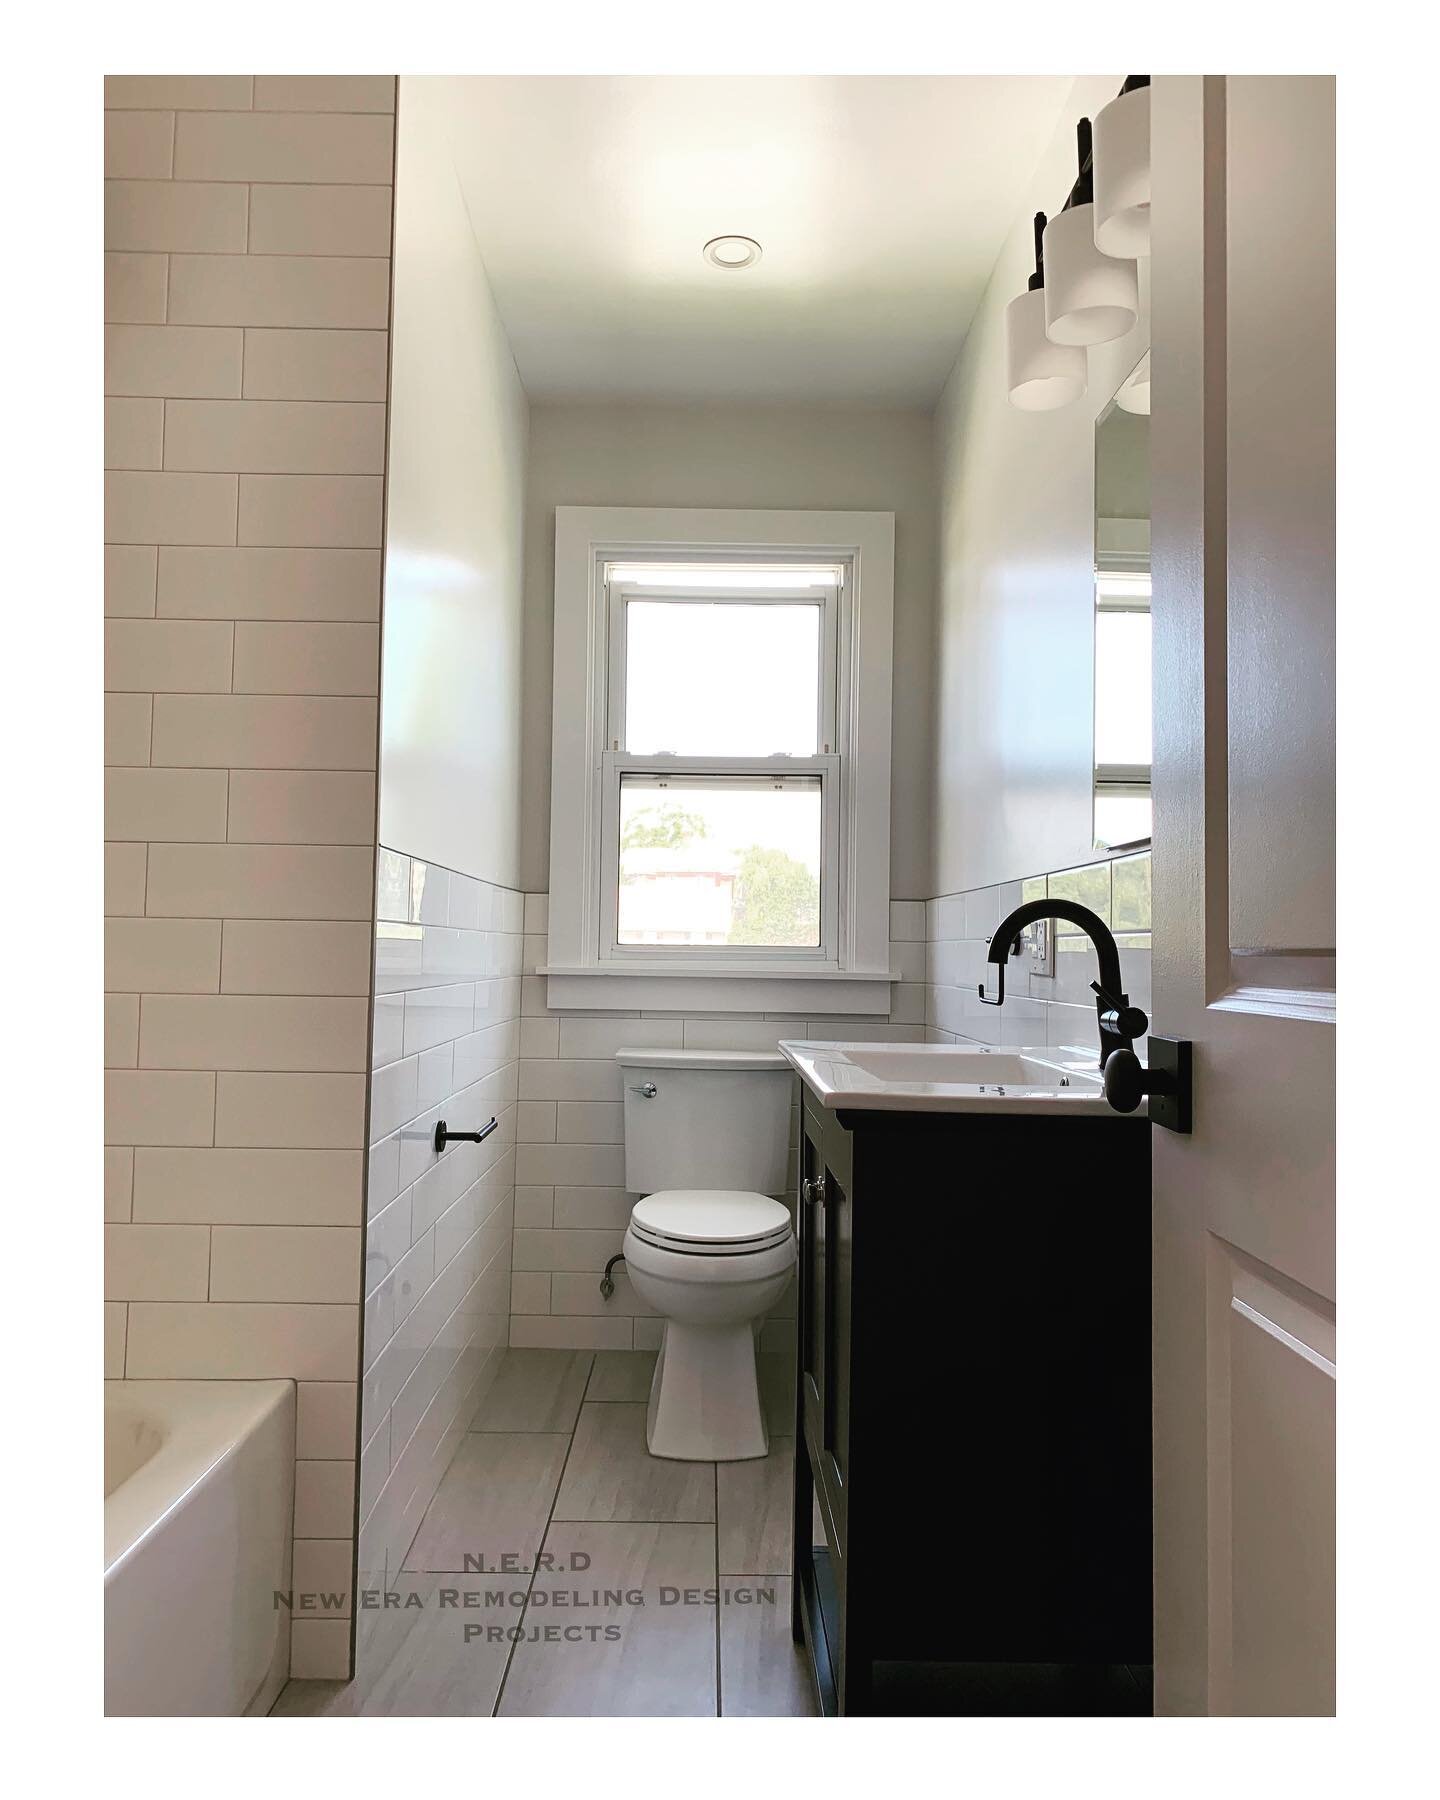 Complete bathroom redesign &amp; remodel.  By rearranging components we create a bathroom with flow and FUNCTION.  Swipe for full before &amp; after. #TeamNeRdProjects #interiorremodeling #homeimprovement #builder #houzz #HGTV #brooklyncontractor #in